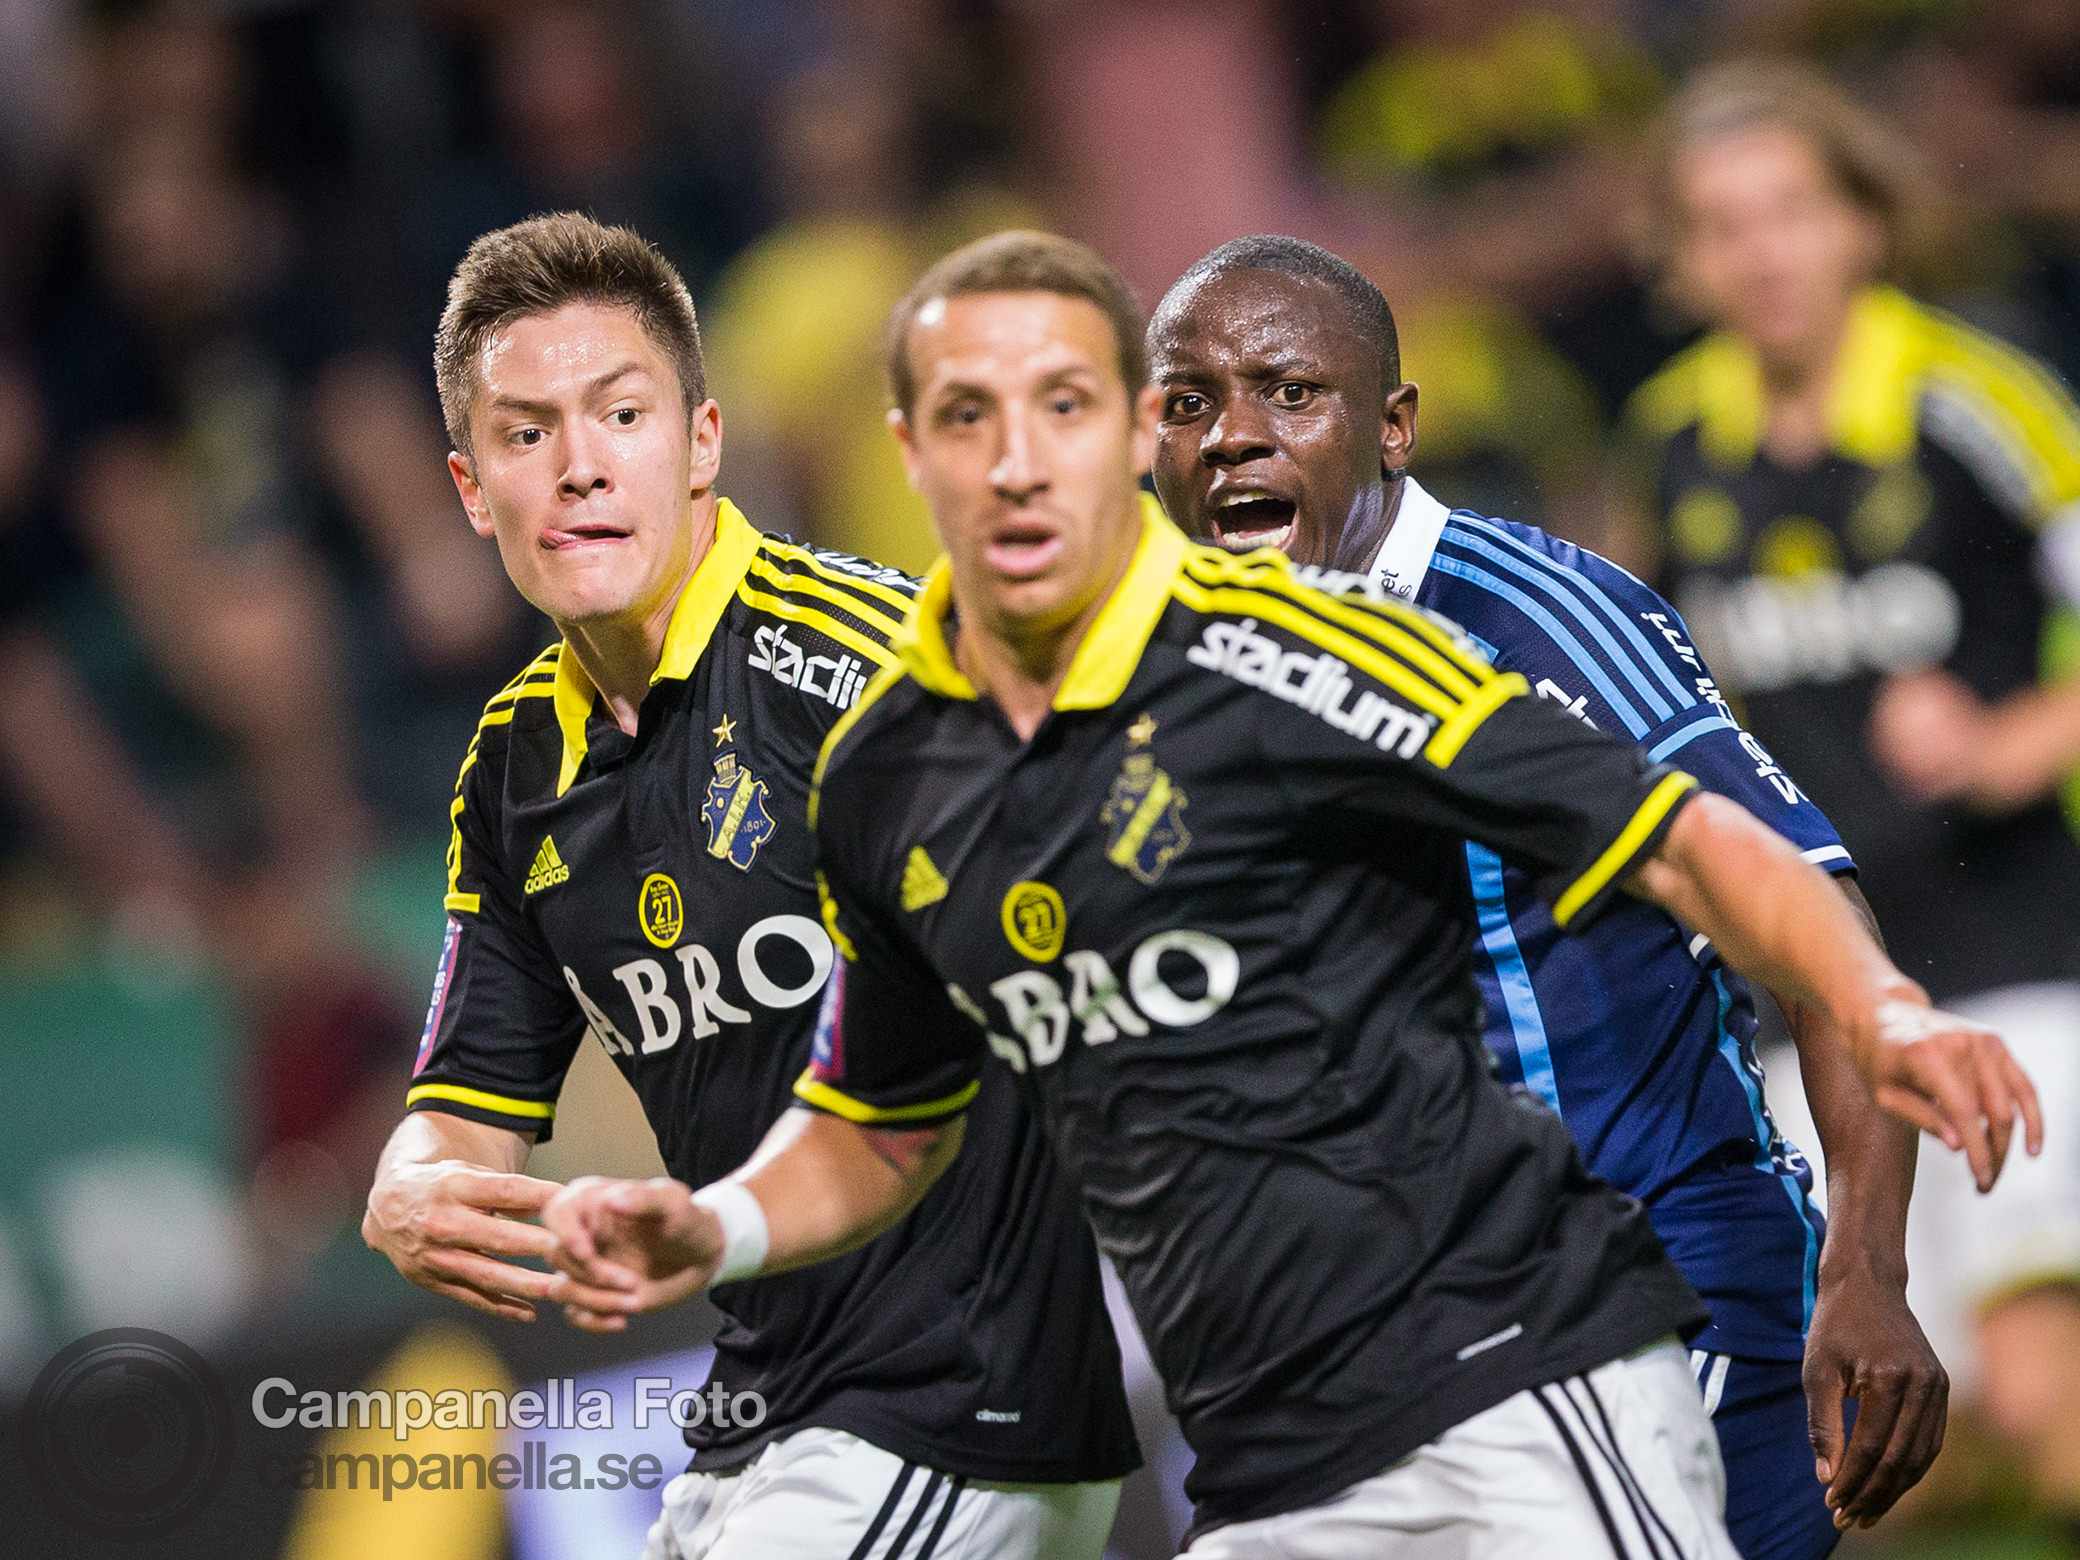 AIK takes the derby - Michael Campanella Photography